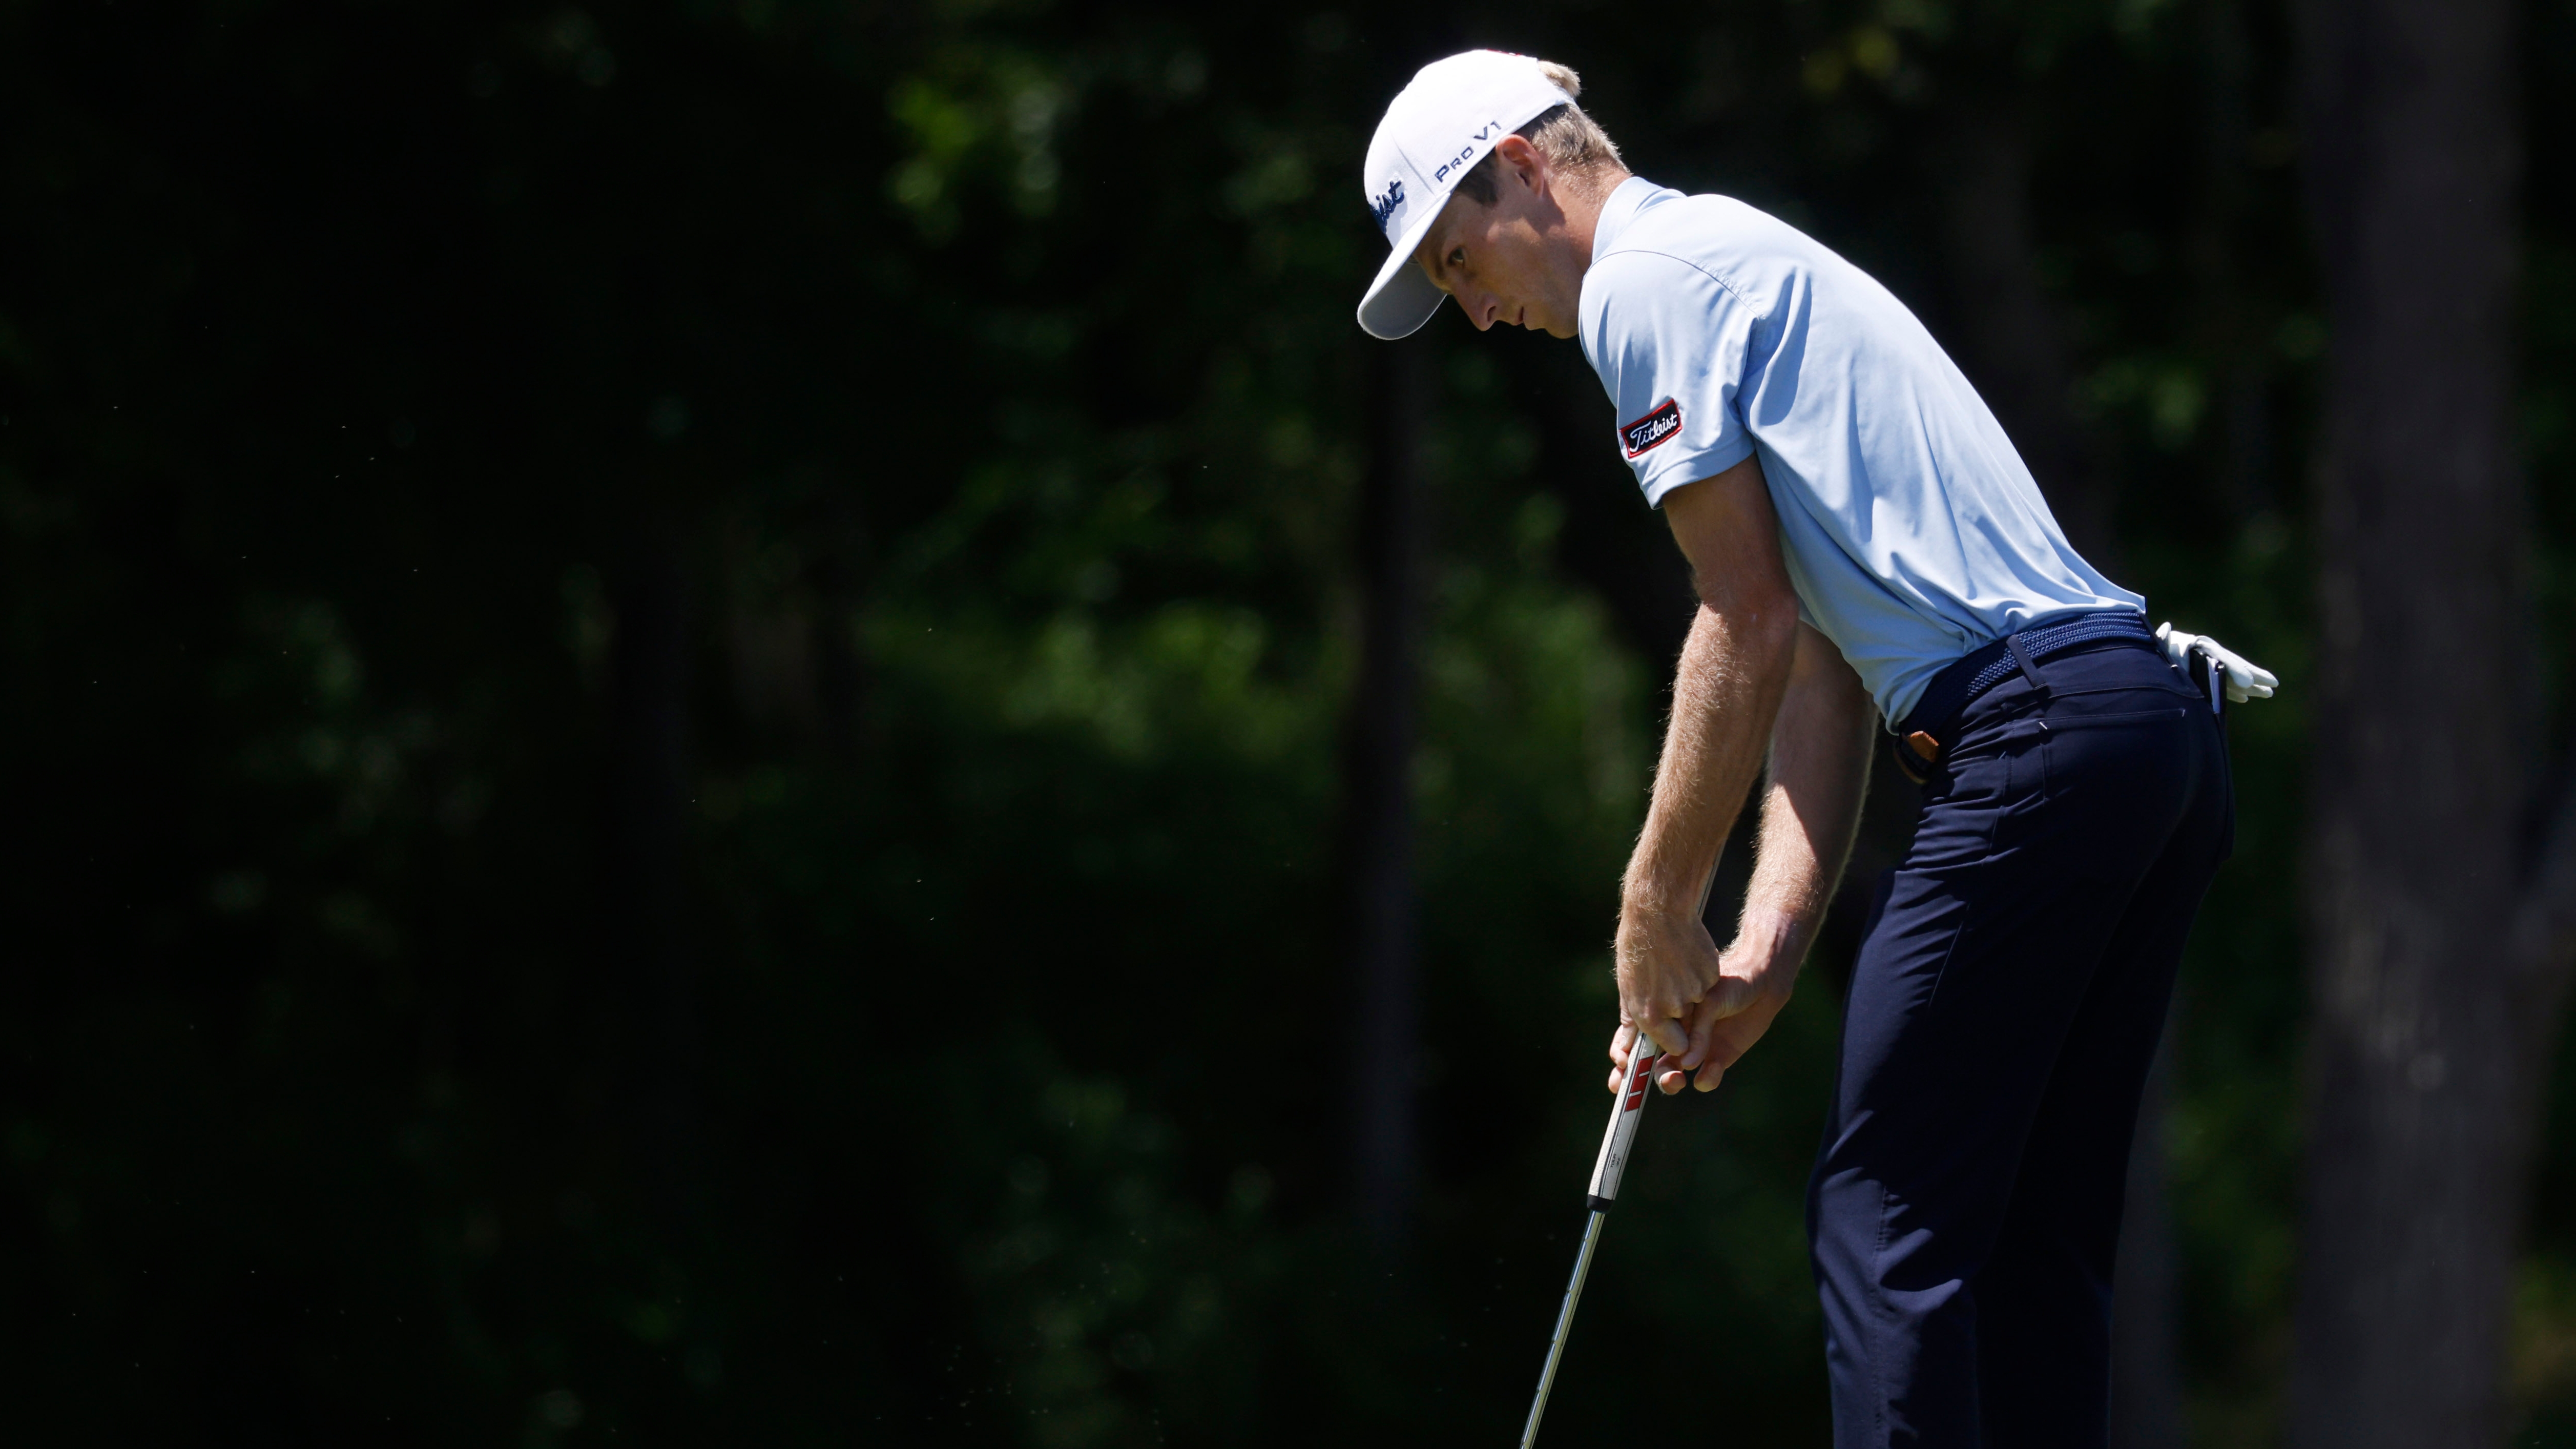 10 things to know about Will Zalatoris, including his first PGA tour win